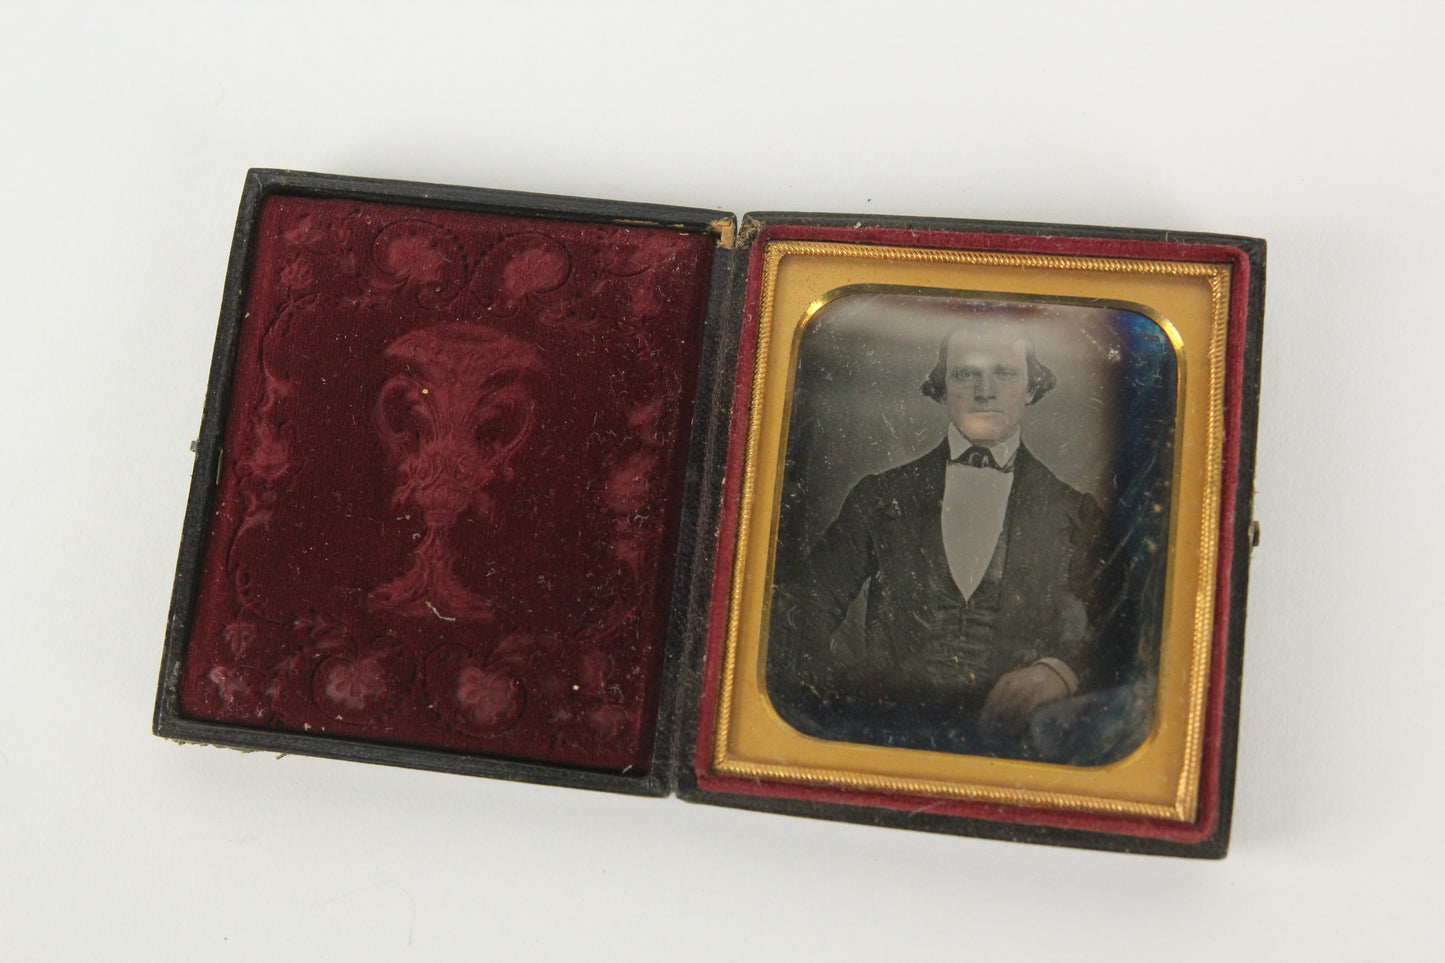 Daguerreortype Photograph of an Important Looking Man in Full Case (1/6 Plate)